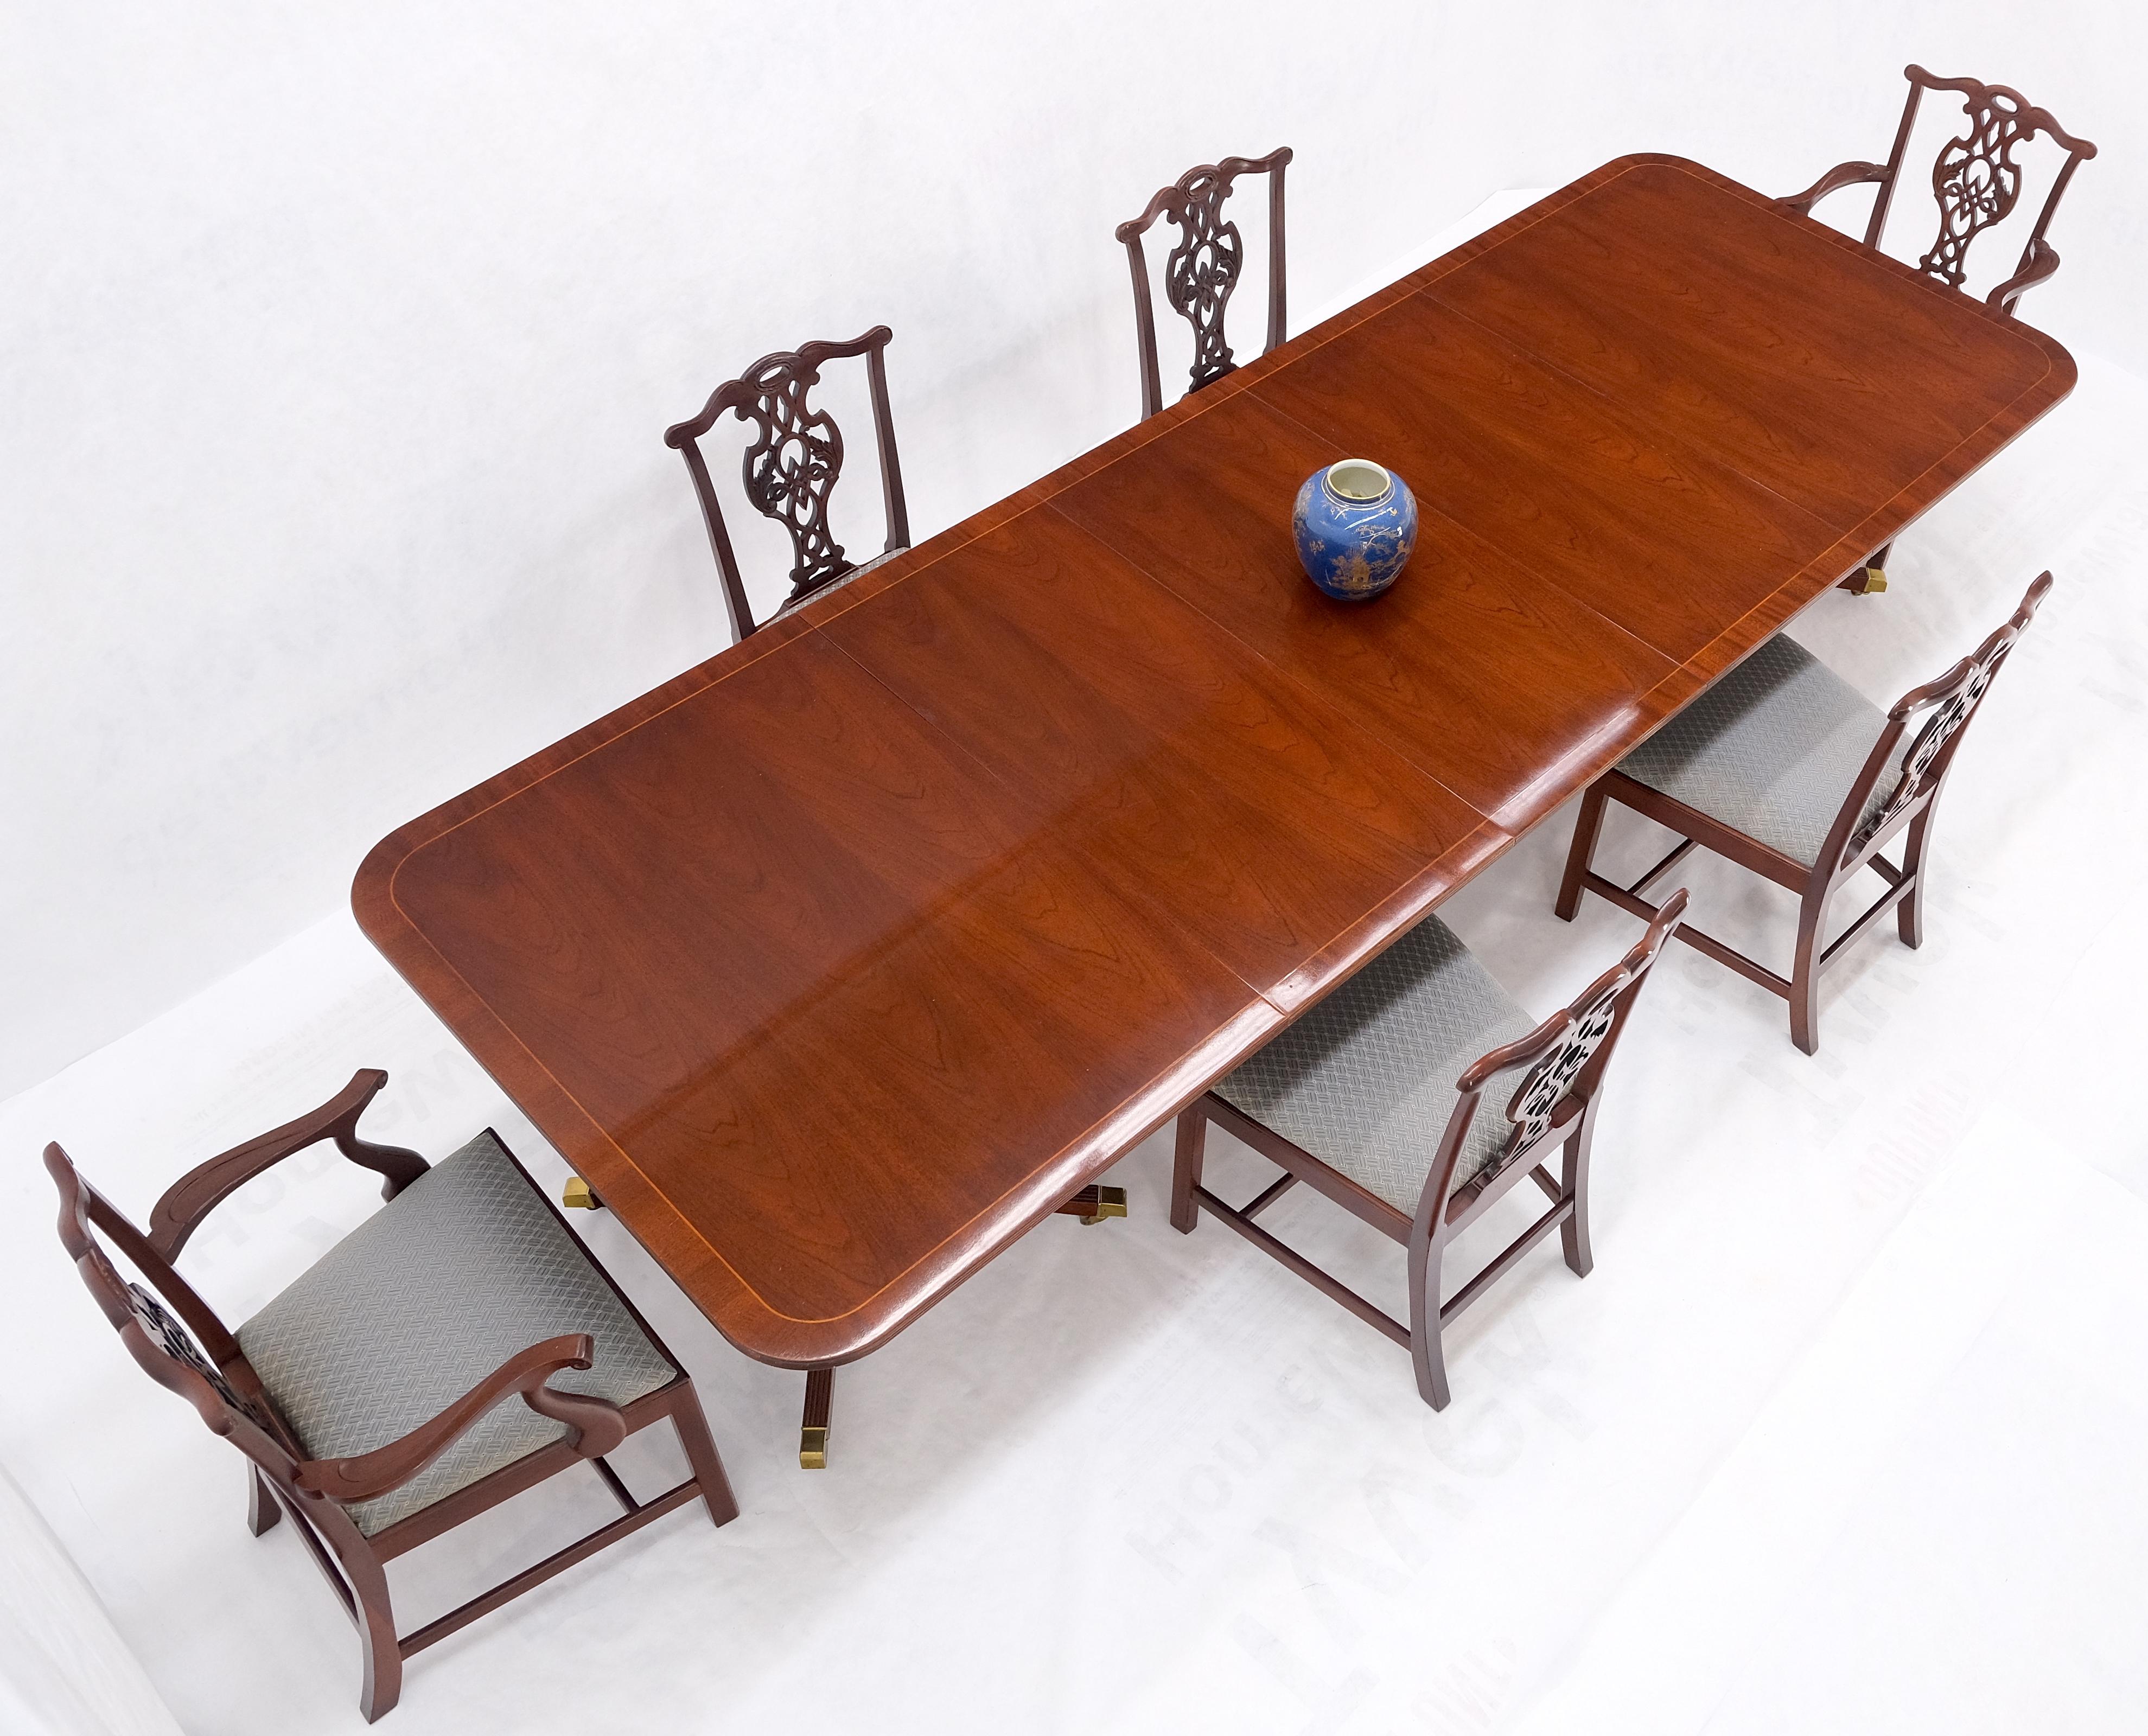 Baker Charleston Collection double pedestal mahogany banded dining table w/ 3 extension leaves 6 chairs set.

Chair: 19 × 22 x 38 inches
Seat: 19 inches

Table: 46 x 68 × 30 inches
Leaf: (3) 20 inches across.